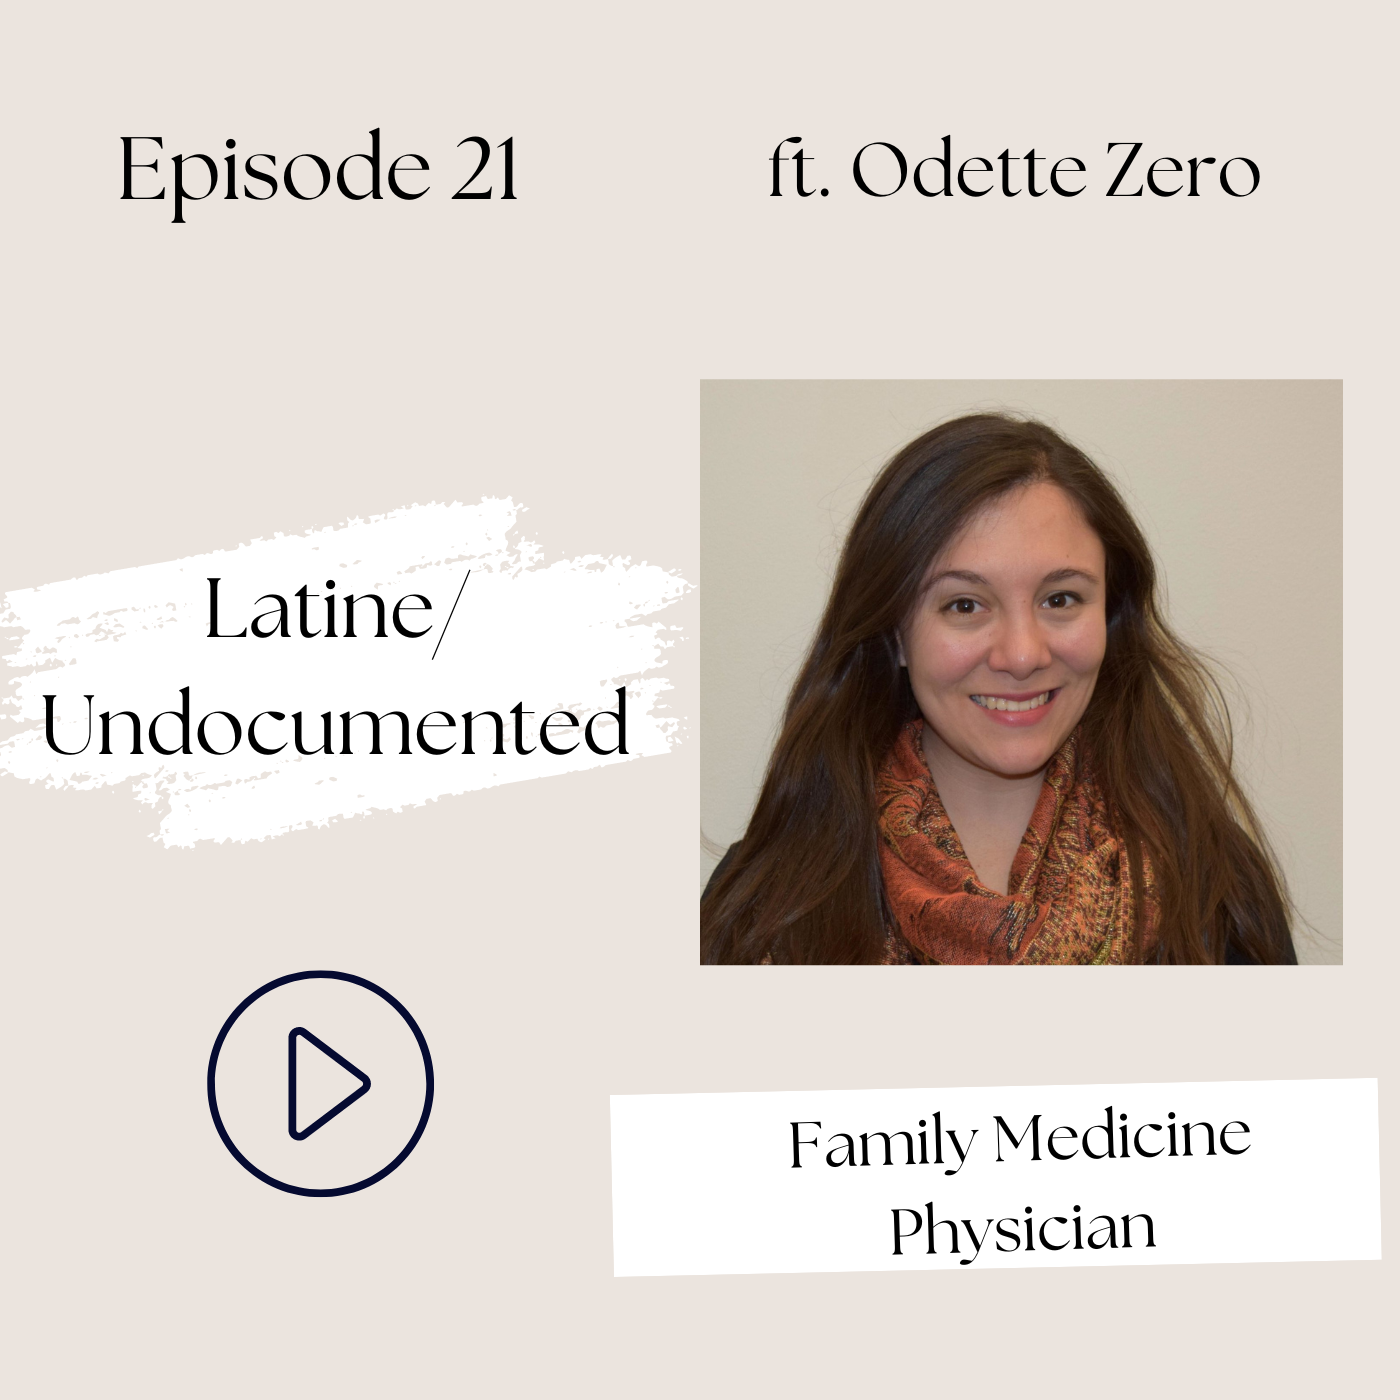 Latine/Caring for Undocumented Latinx Patients Through Illness Narratives (Dr. Odette Zero, Ep 21)